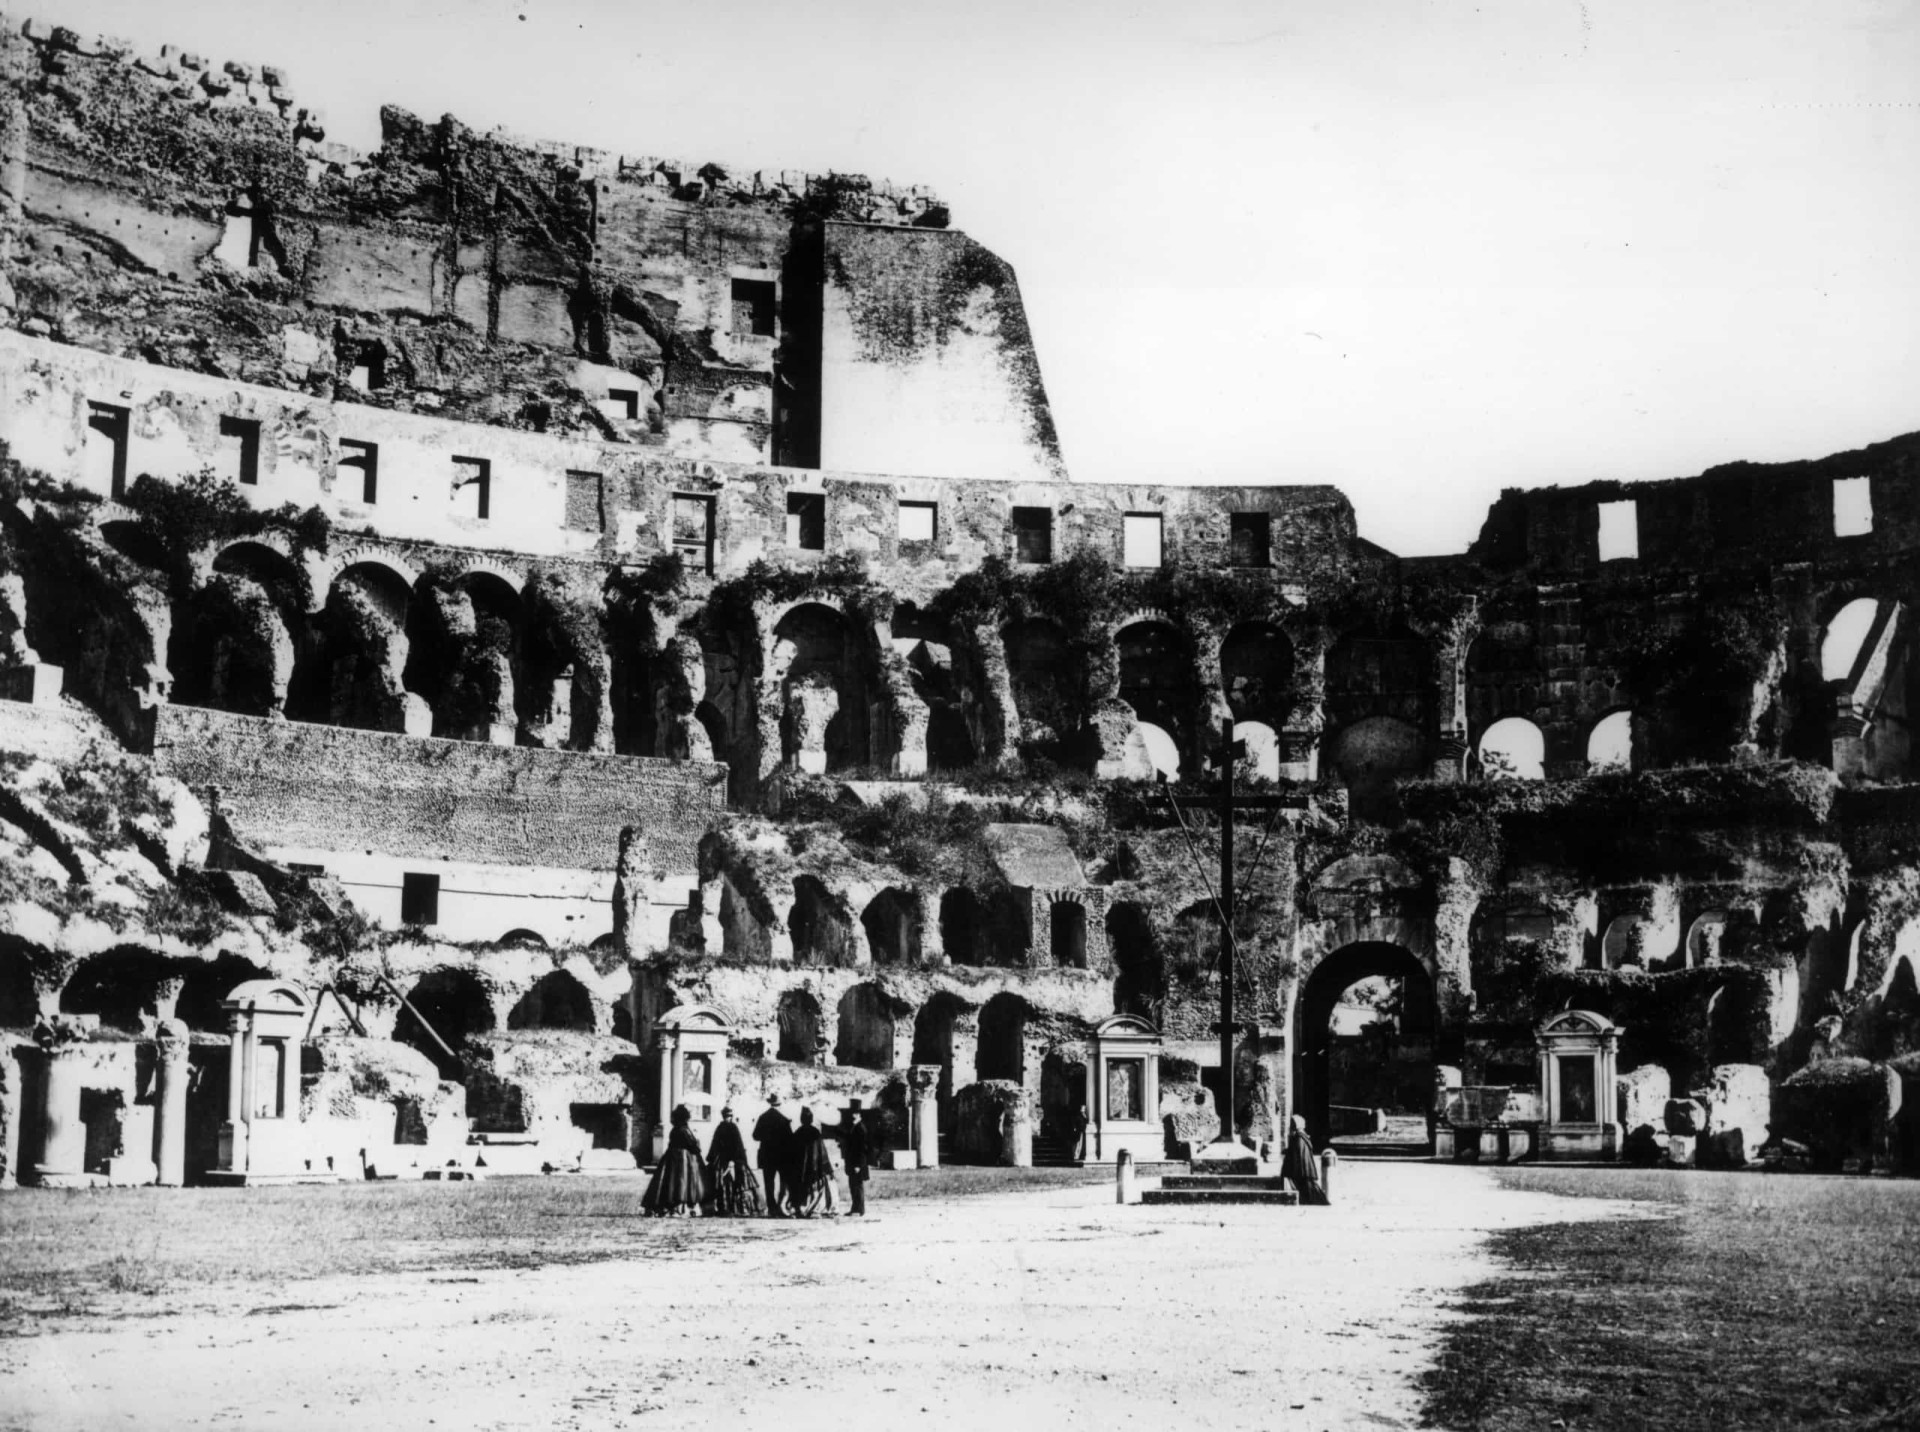 Sightseers gaze at the Roman Colosseum in 1860. The ancient construction was built back in 70-80 CE, and of course is still open to this day.<p>You may also like:<a href="https://www.starsinsider.com/n/399804?utm_source=msn.com&utm_medium=display&utm_campaign=referral_description&utm_content=397441v1en-en"> Where to shop at the world's most impressive and luxurious malls</a></p>